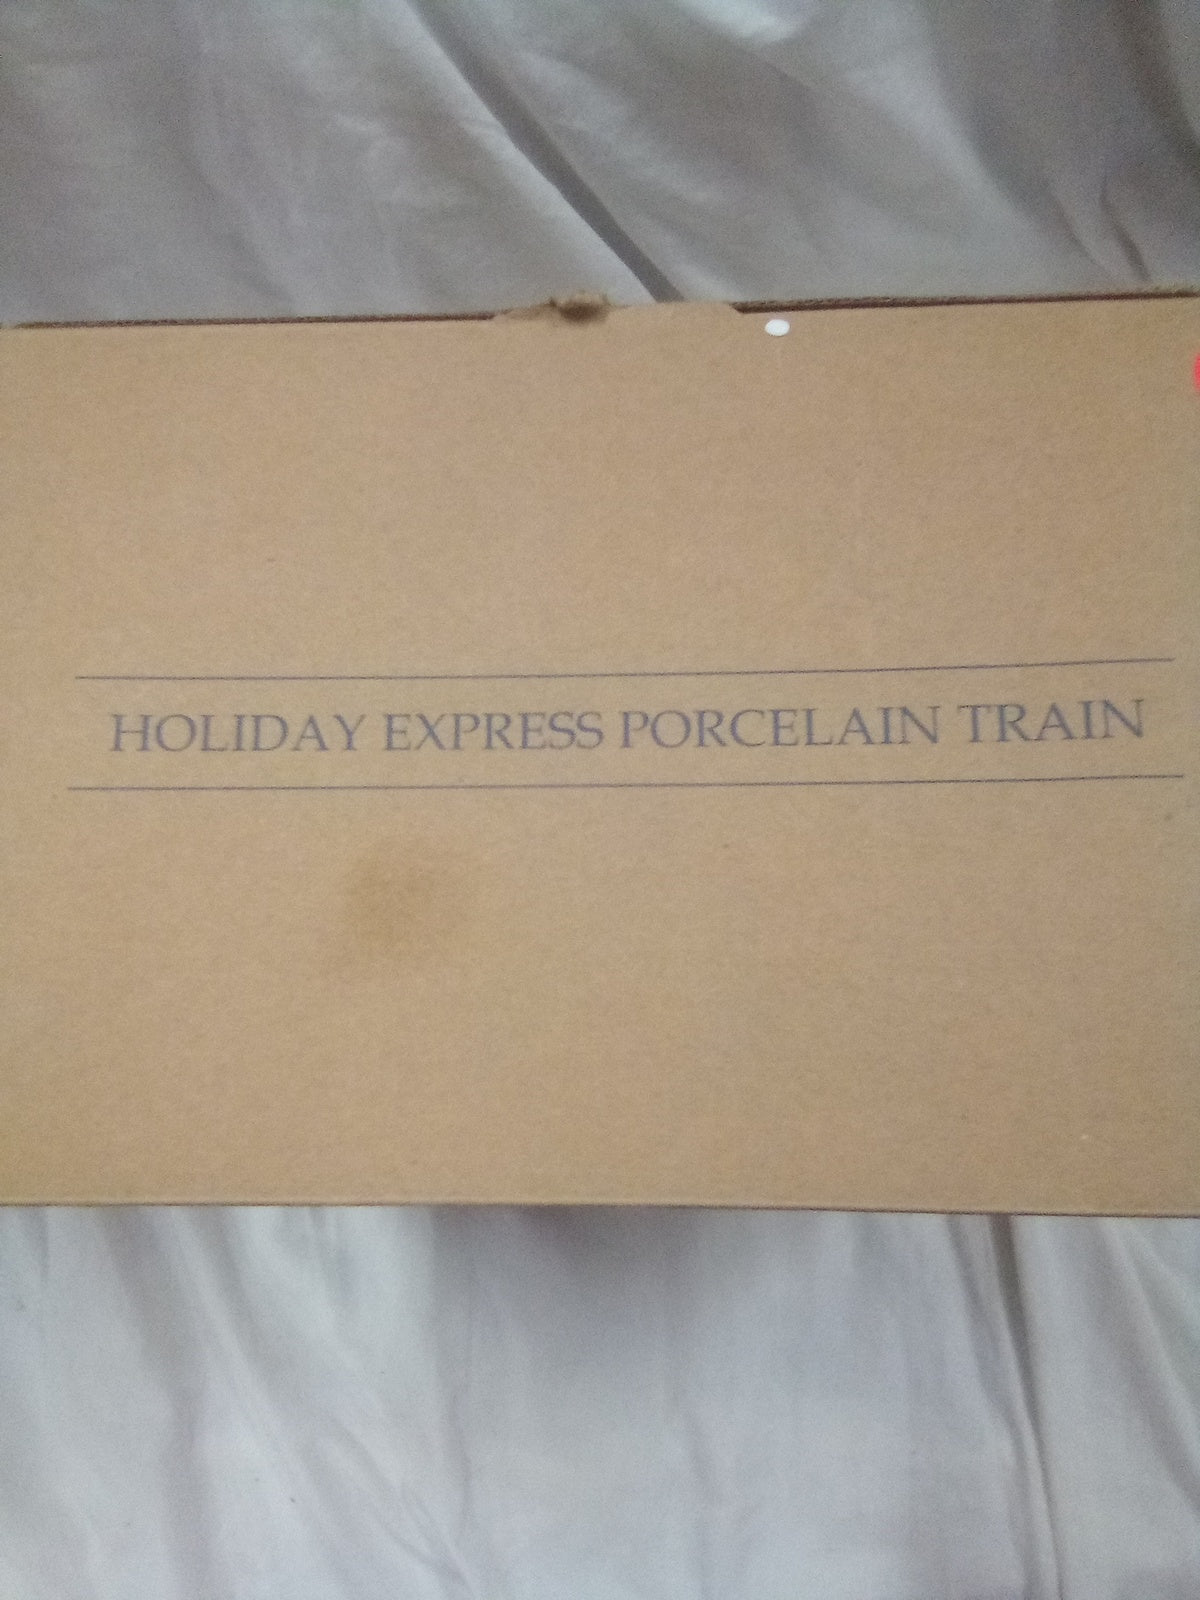 Holiday Express porcelain train Avon gift collection